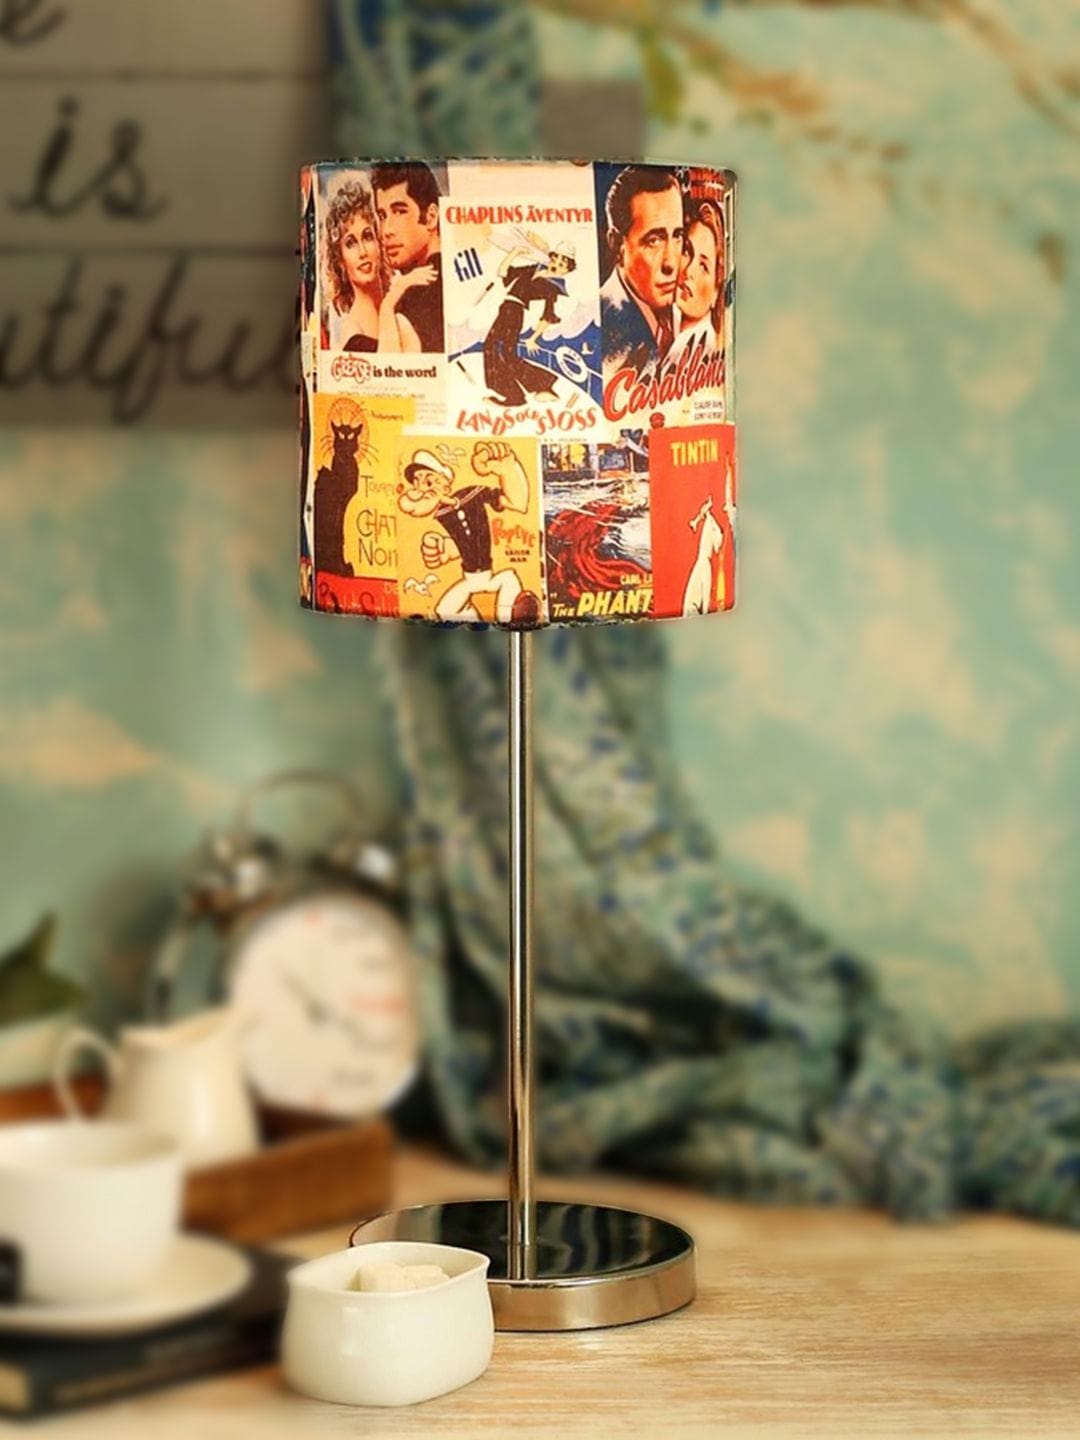 The Classic Hollywood Lamp